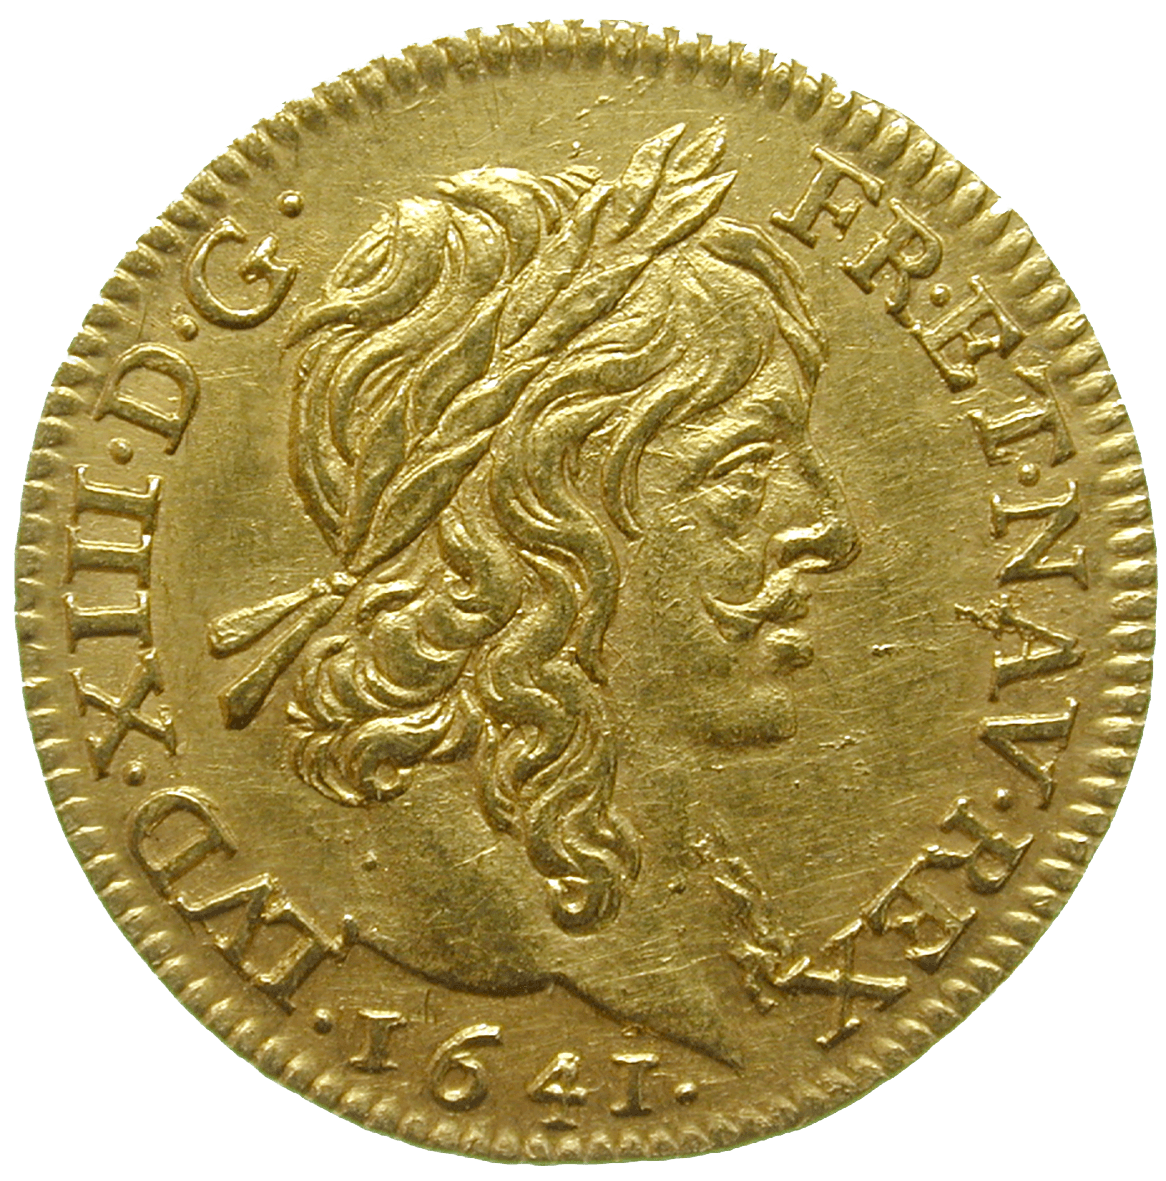 Kingdom of France, Louis XIII, 1/2 Louis d'or 1641 (obverse)